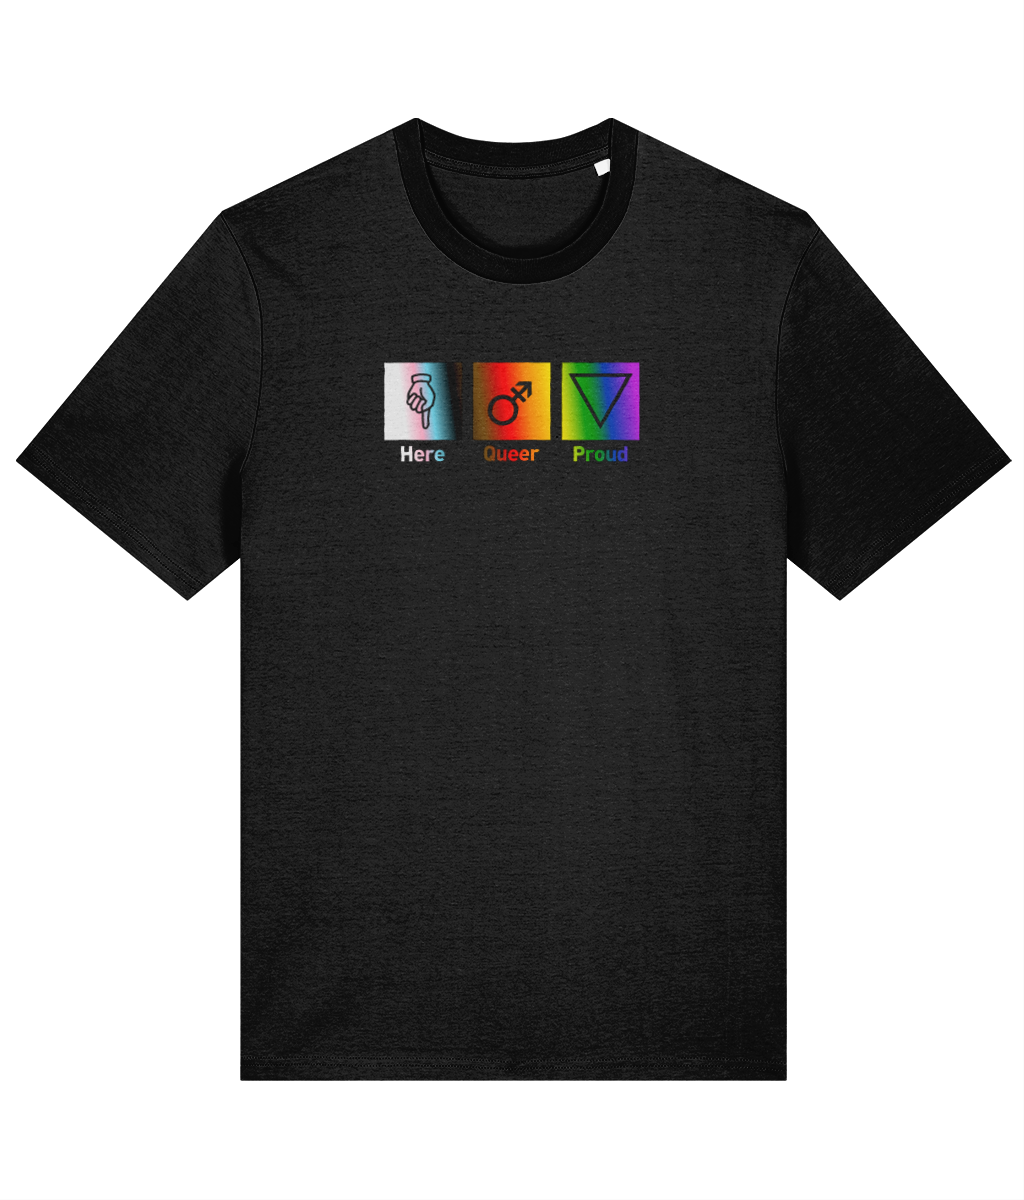 Here Queer Proud Organic Cotton T-shirt